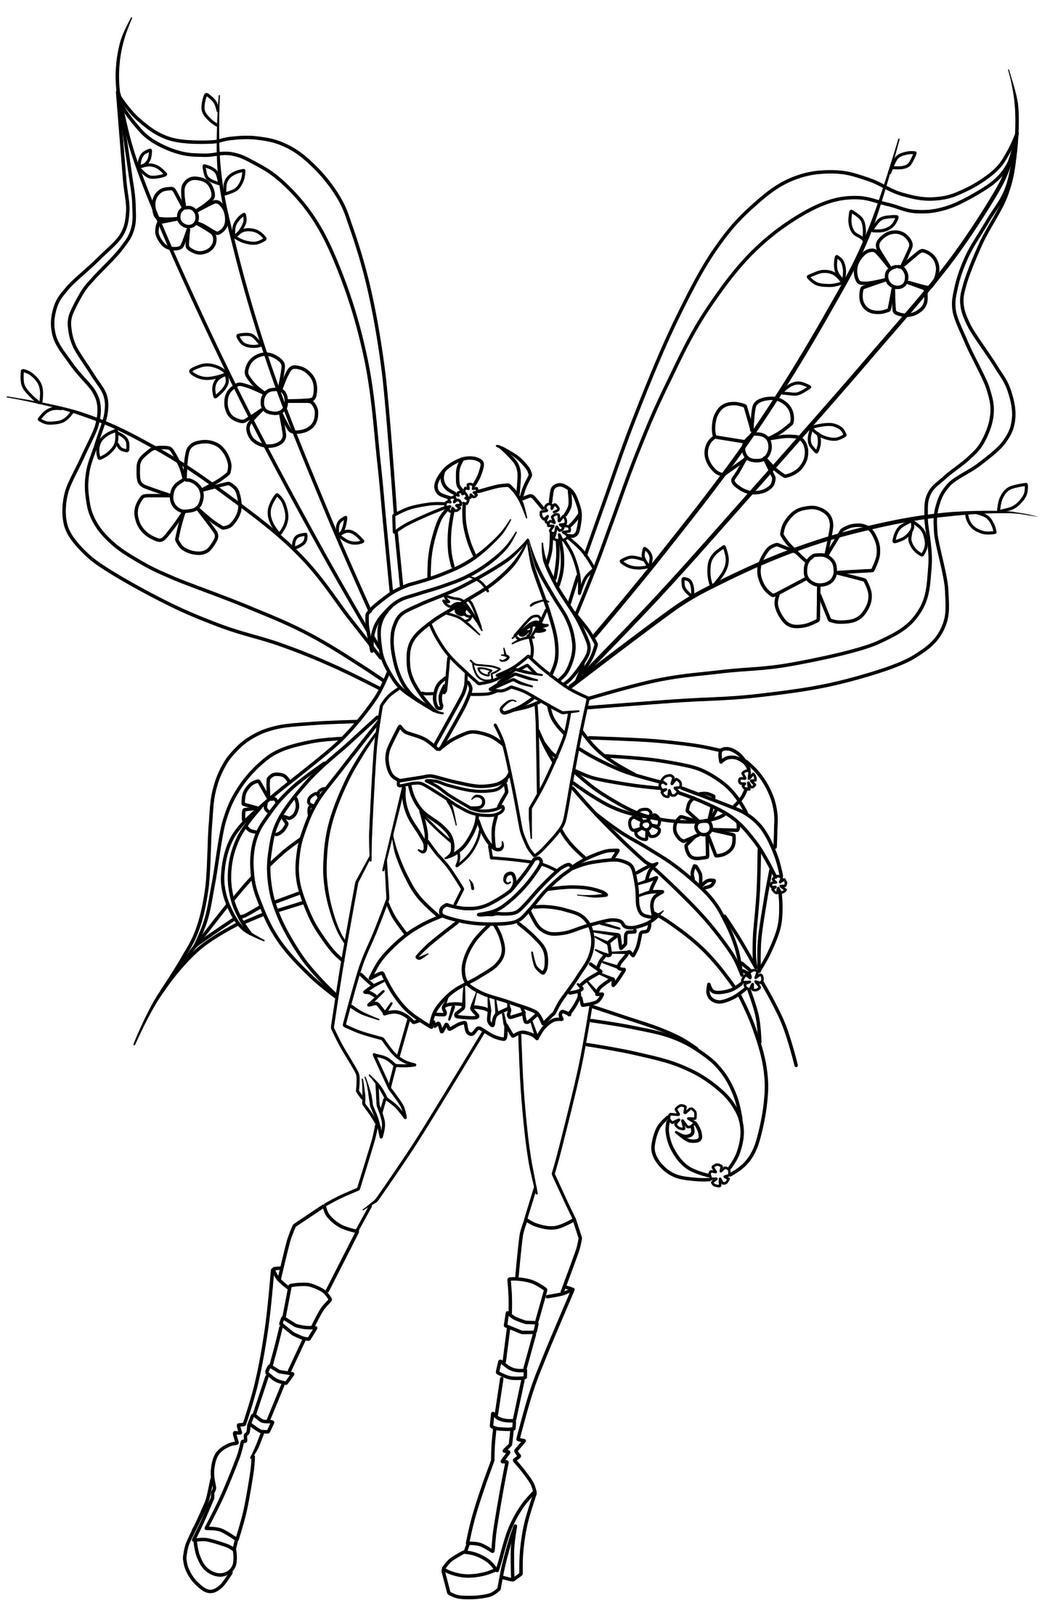  Winx Club Coloring Pages | Hot Winx Club |#1